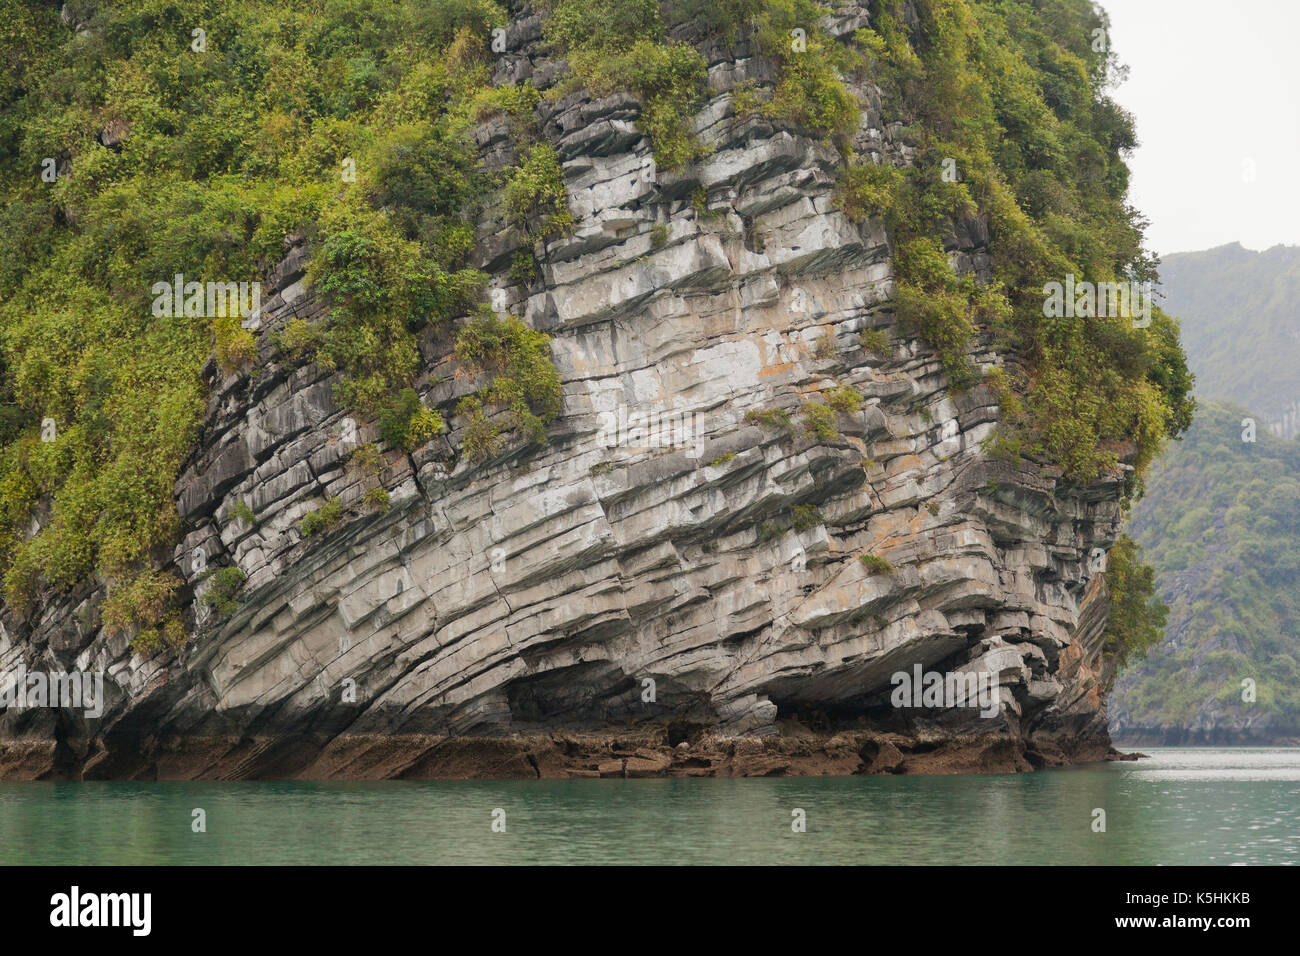 Karst outcrop showing sedimentary layers, built up over thousands of years. Halong Bay, Vietnam. Stock Photo